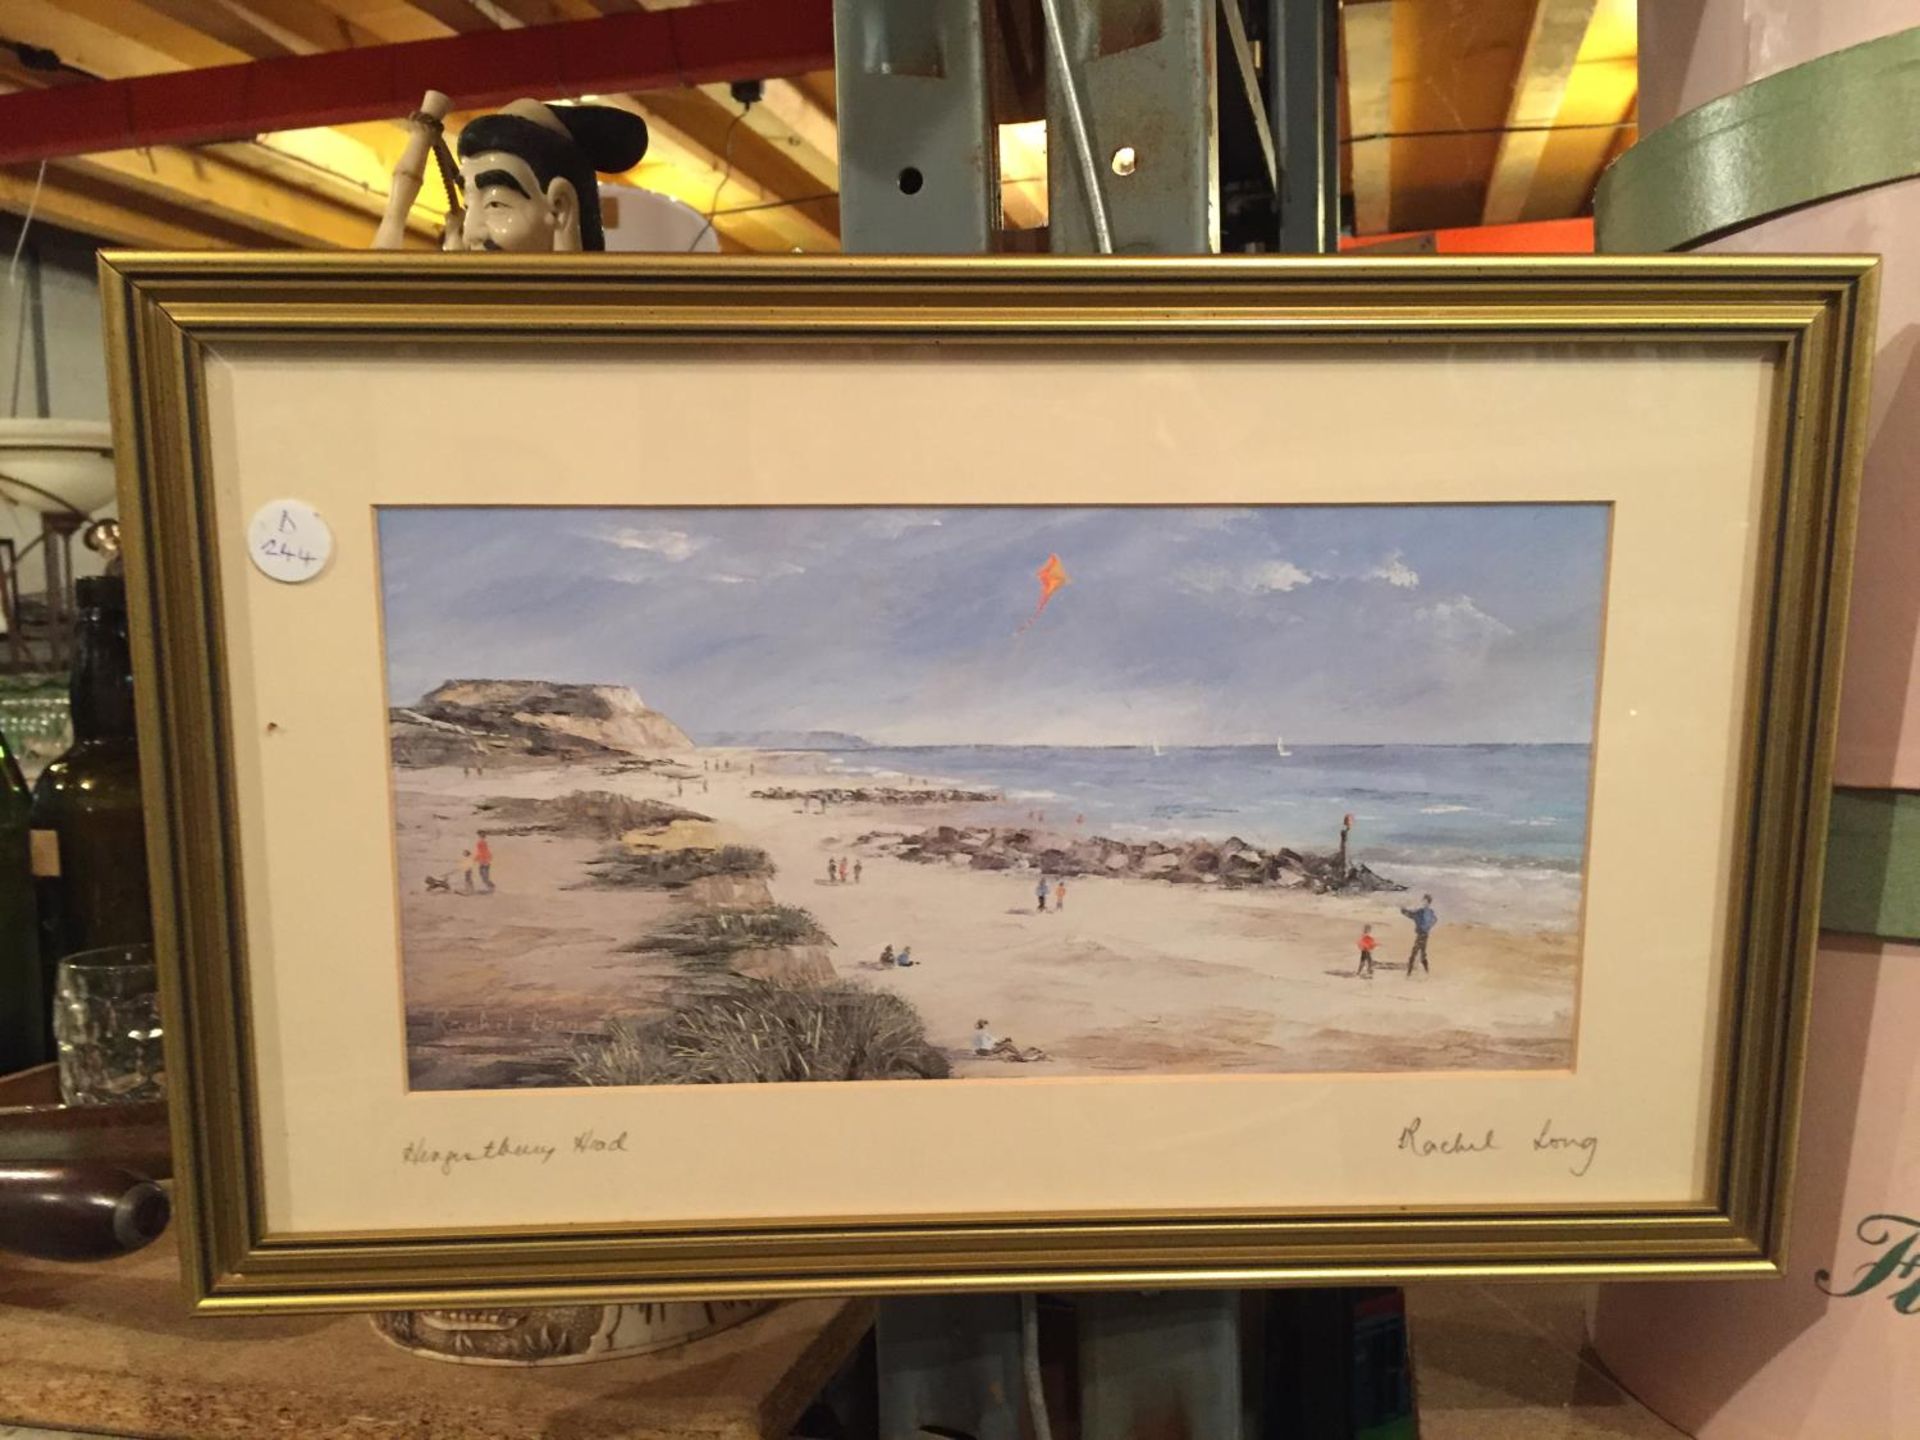 TWO FRAMED SIGNED PICTURES, ONE 'EVENING LIGHT' PENYGHENT, INDISTINCT SIGNATURE, THE OTHER A BEACH - Image 2 of 3